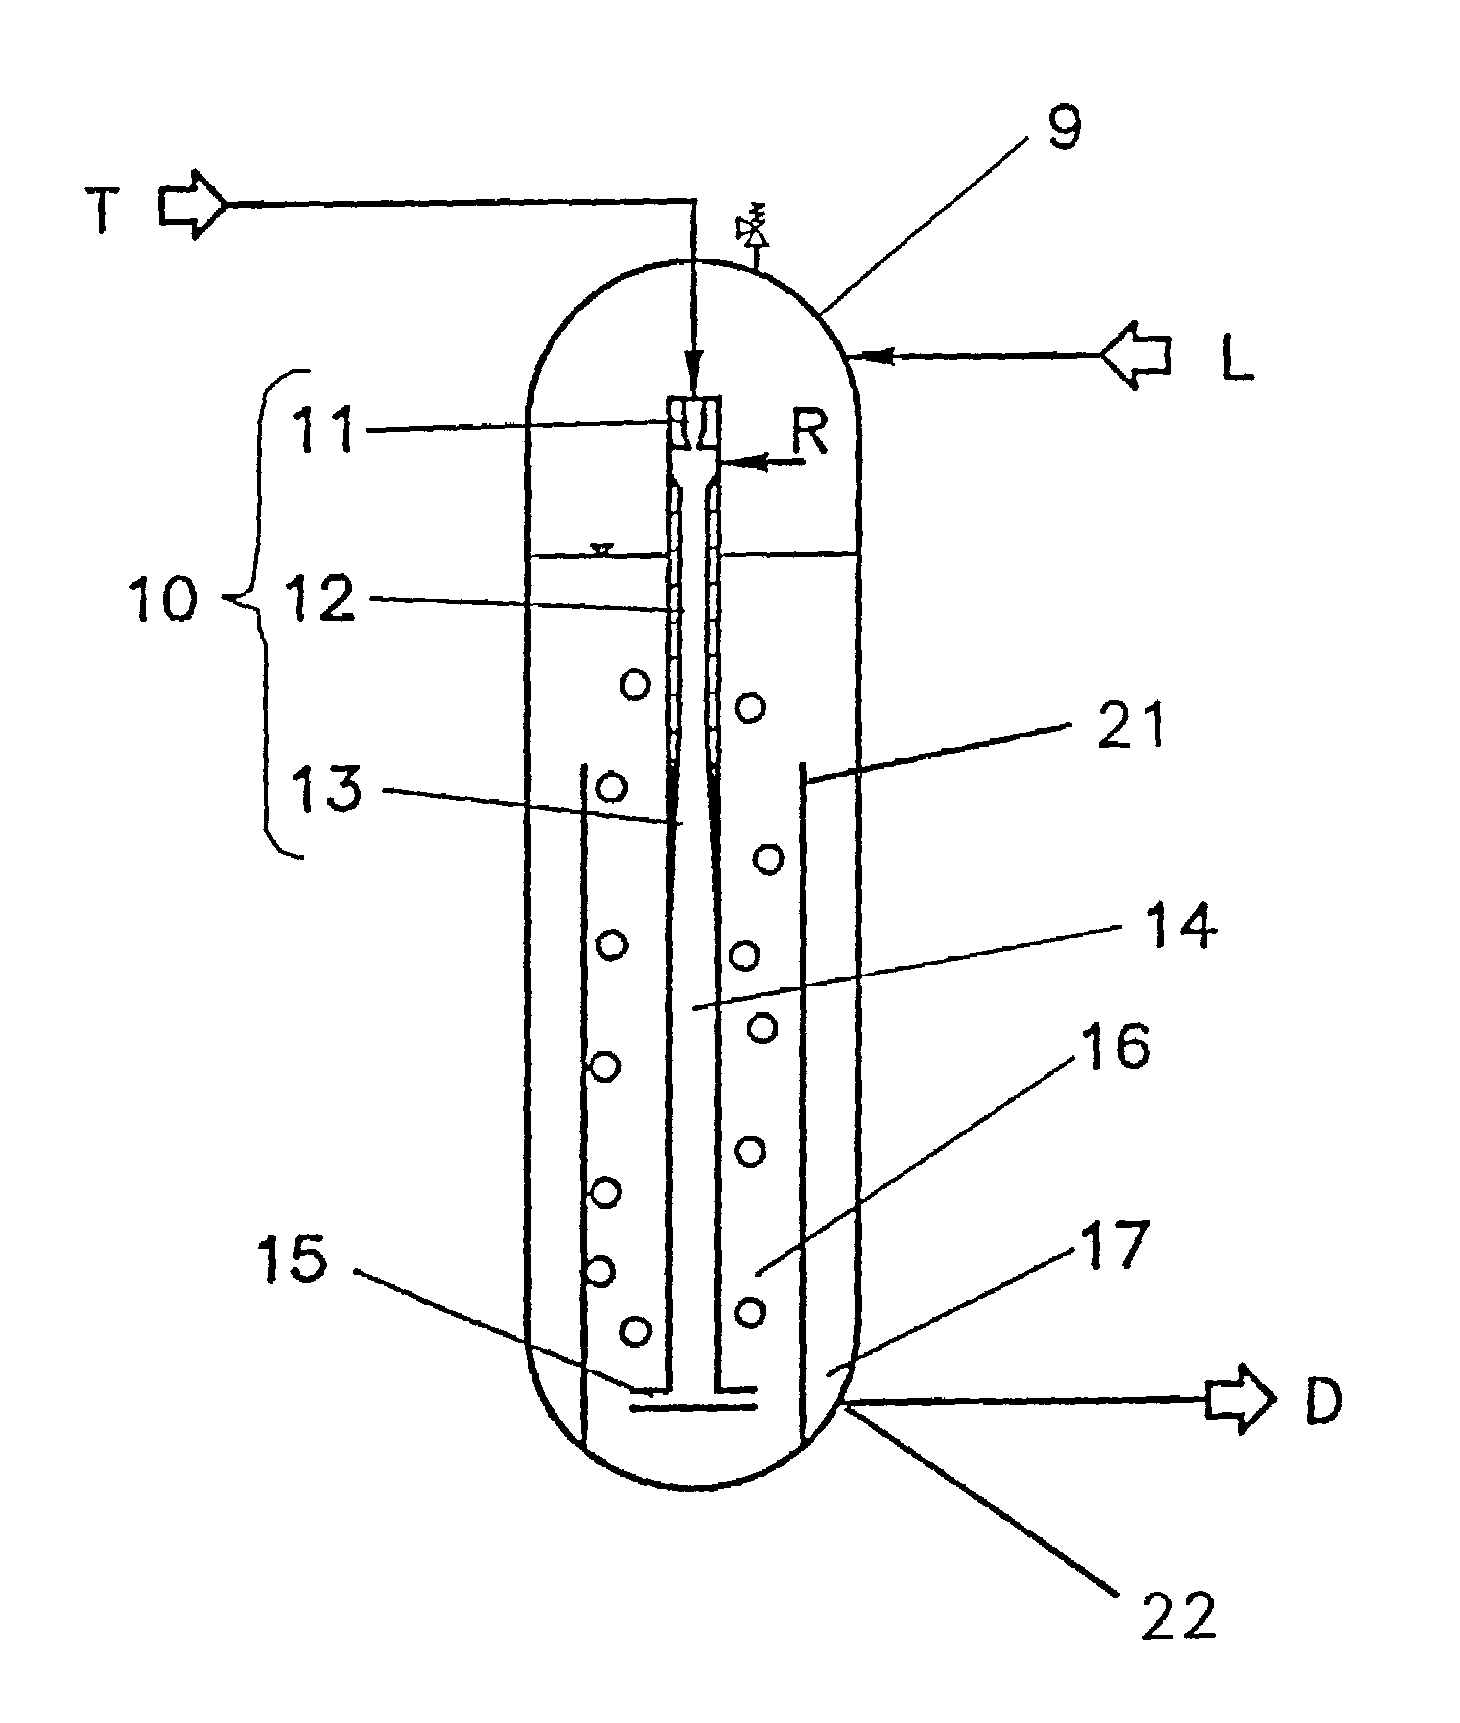 Process and device for aerating a liquid with gas